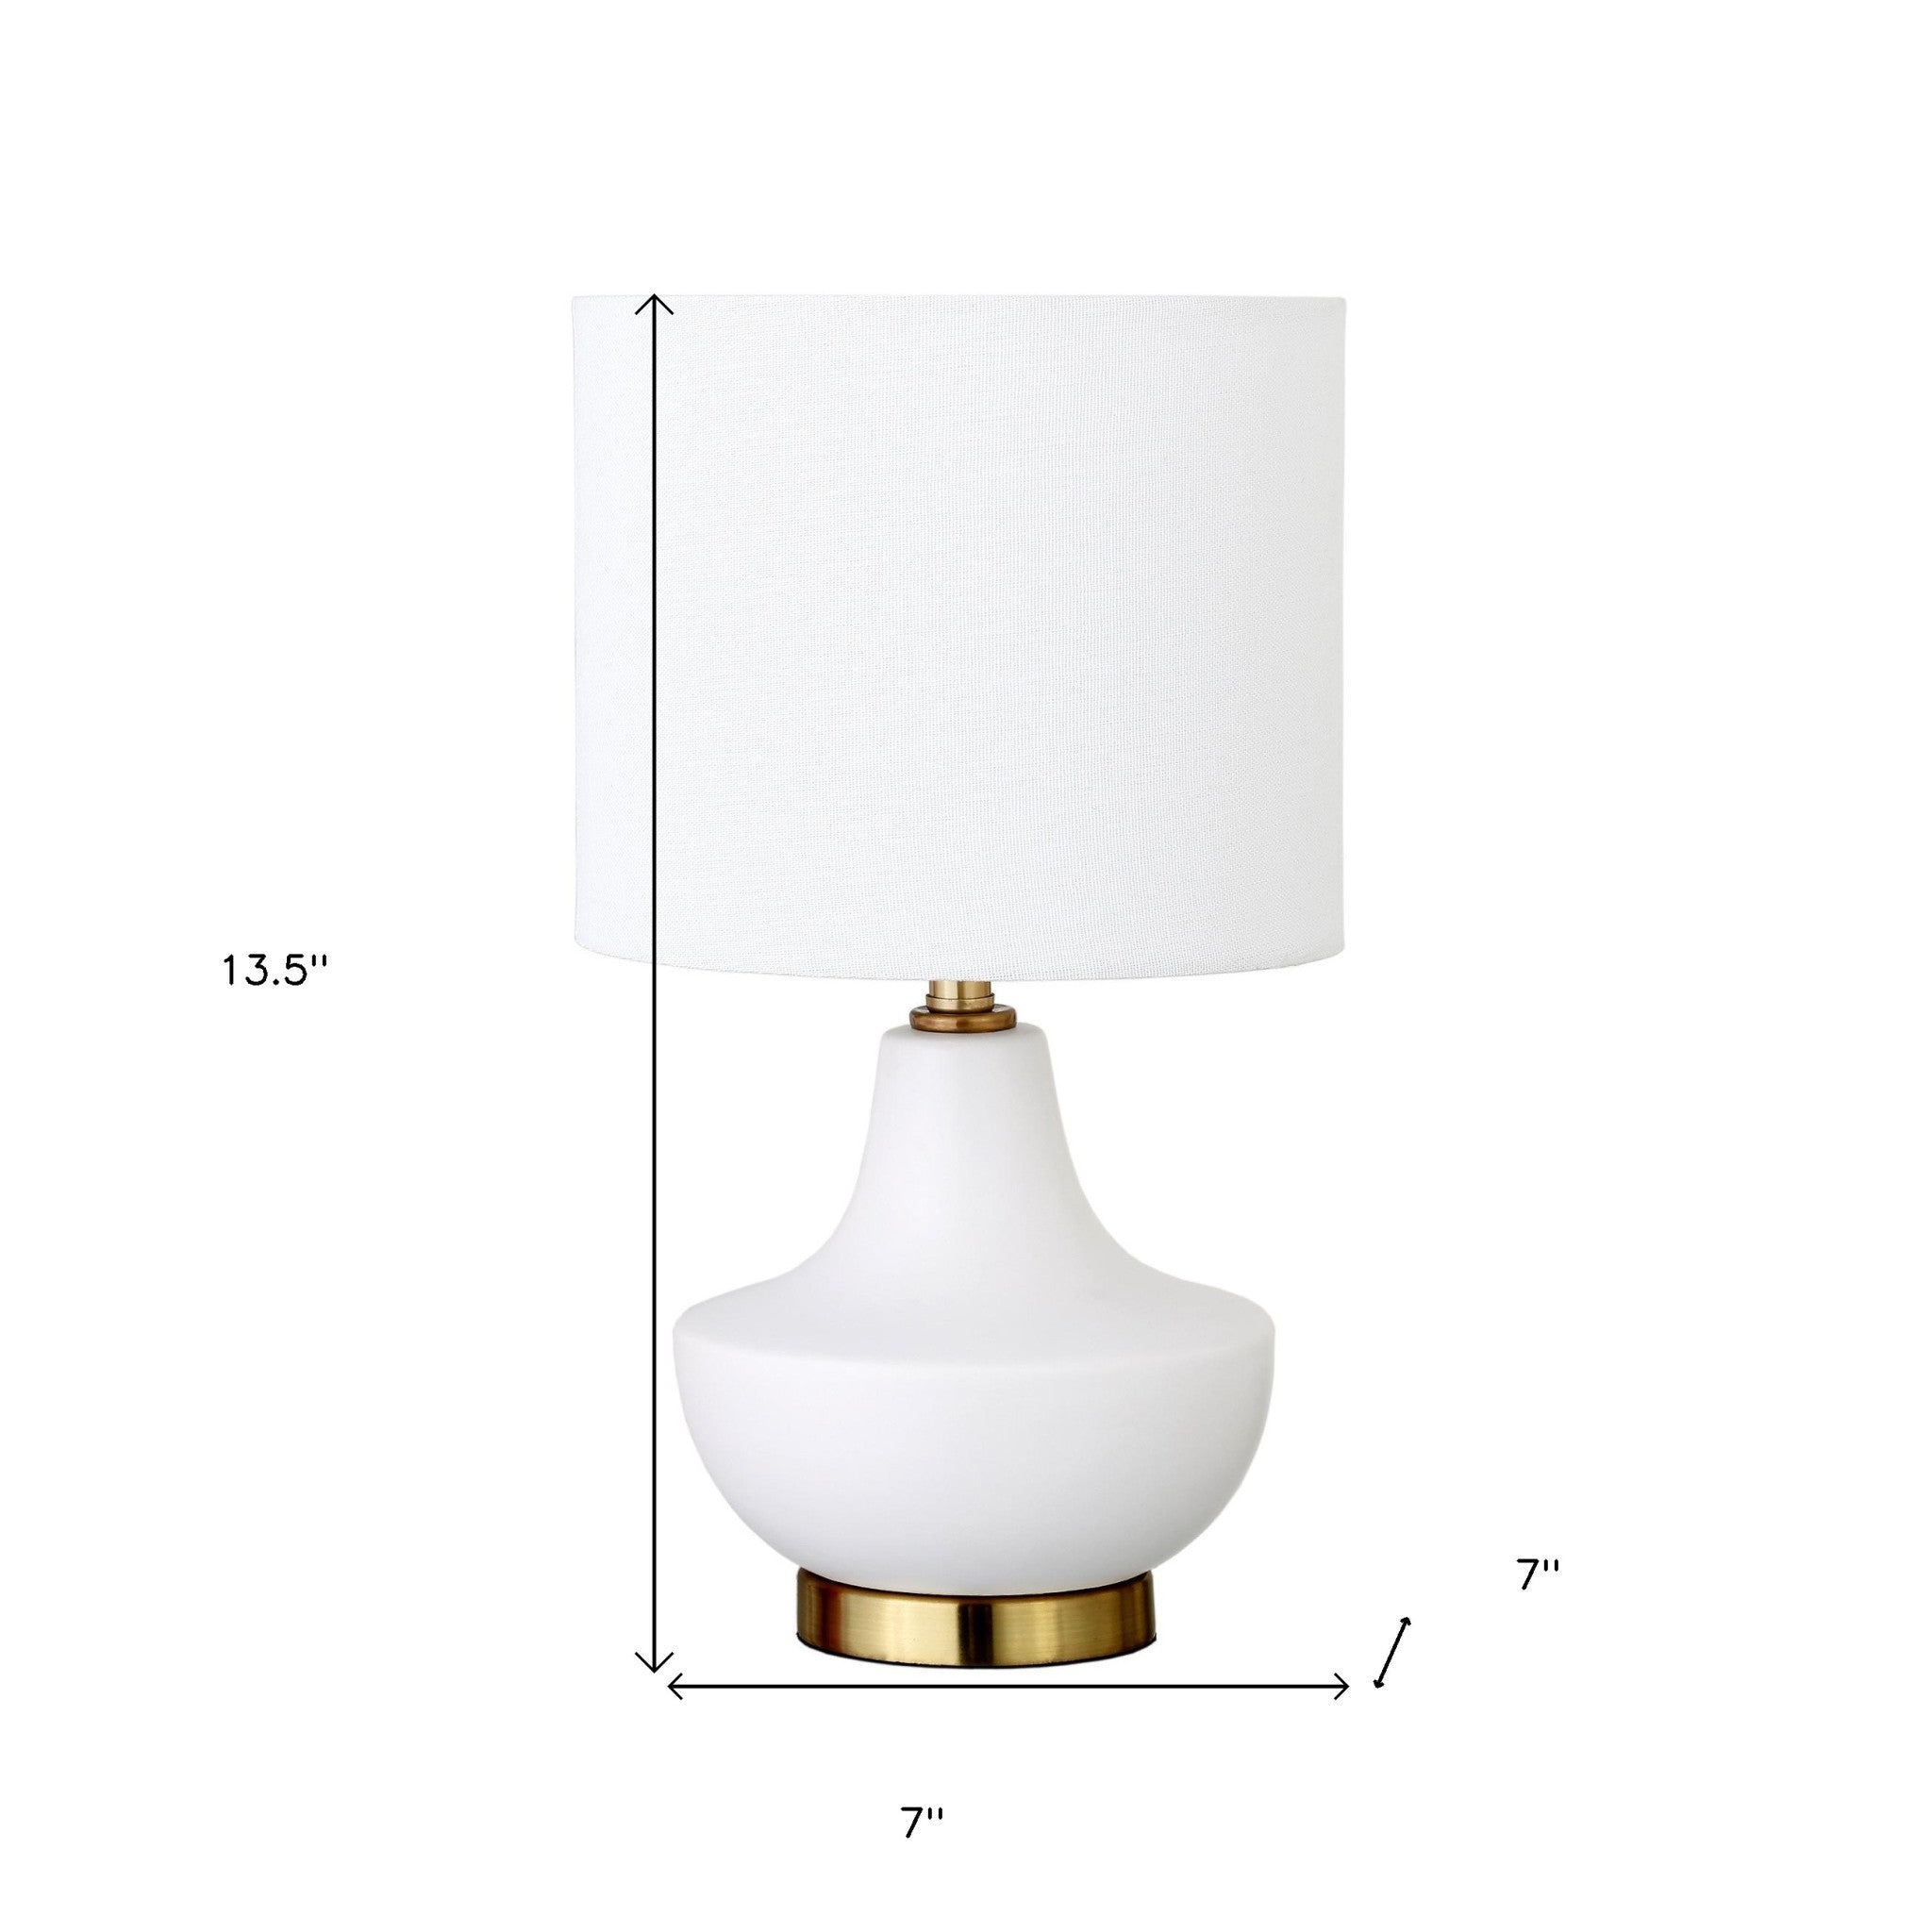 14" Gold and White Ceramic Urn Table Lamp With White Drum Shade